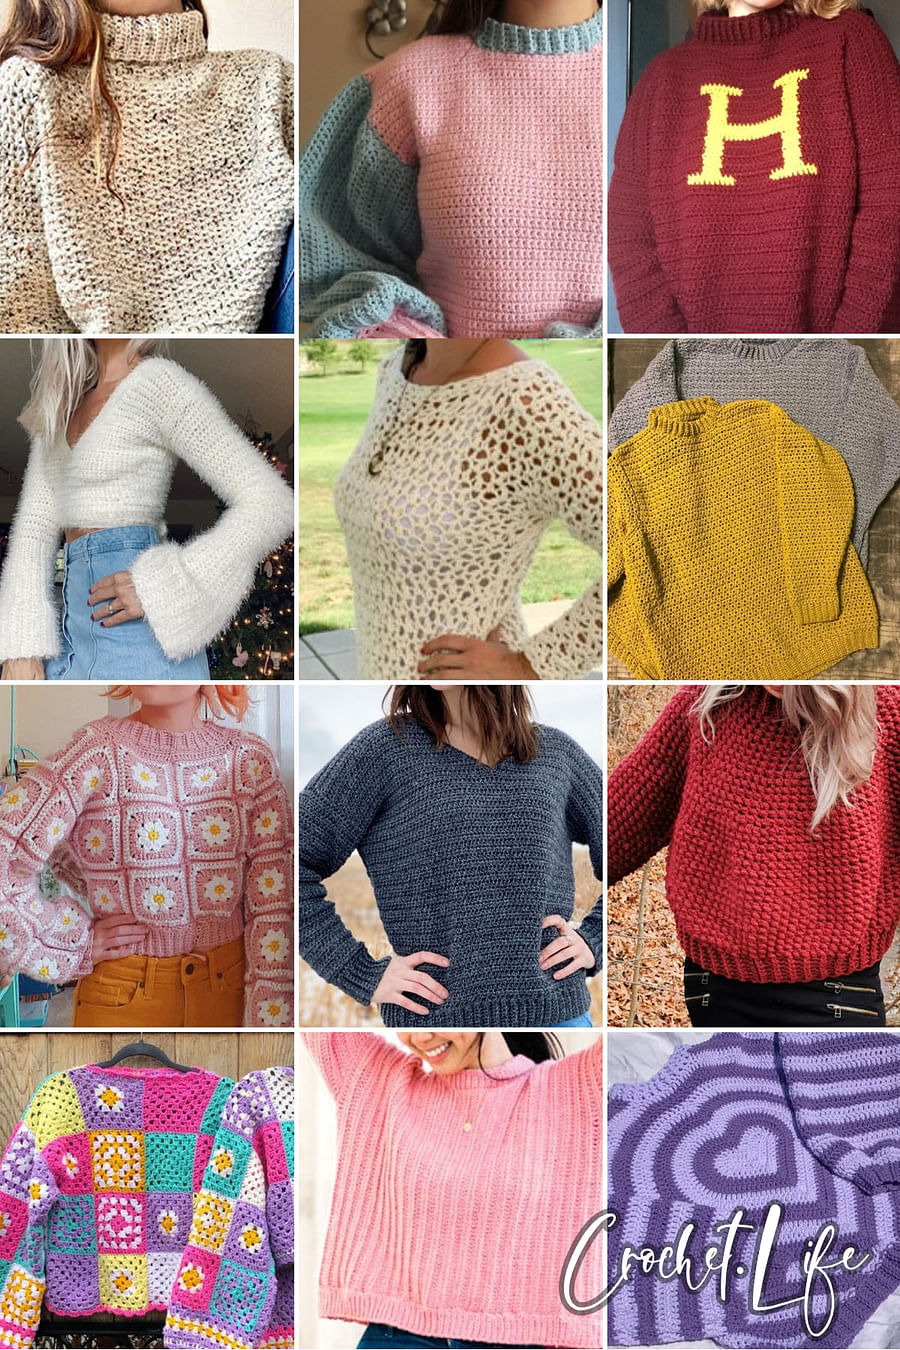 Collage of different types of knitted sweaters showcasing various knitting patterns